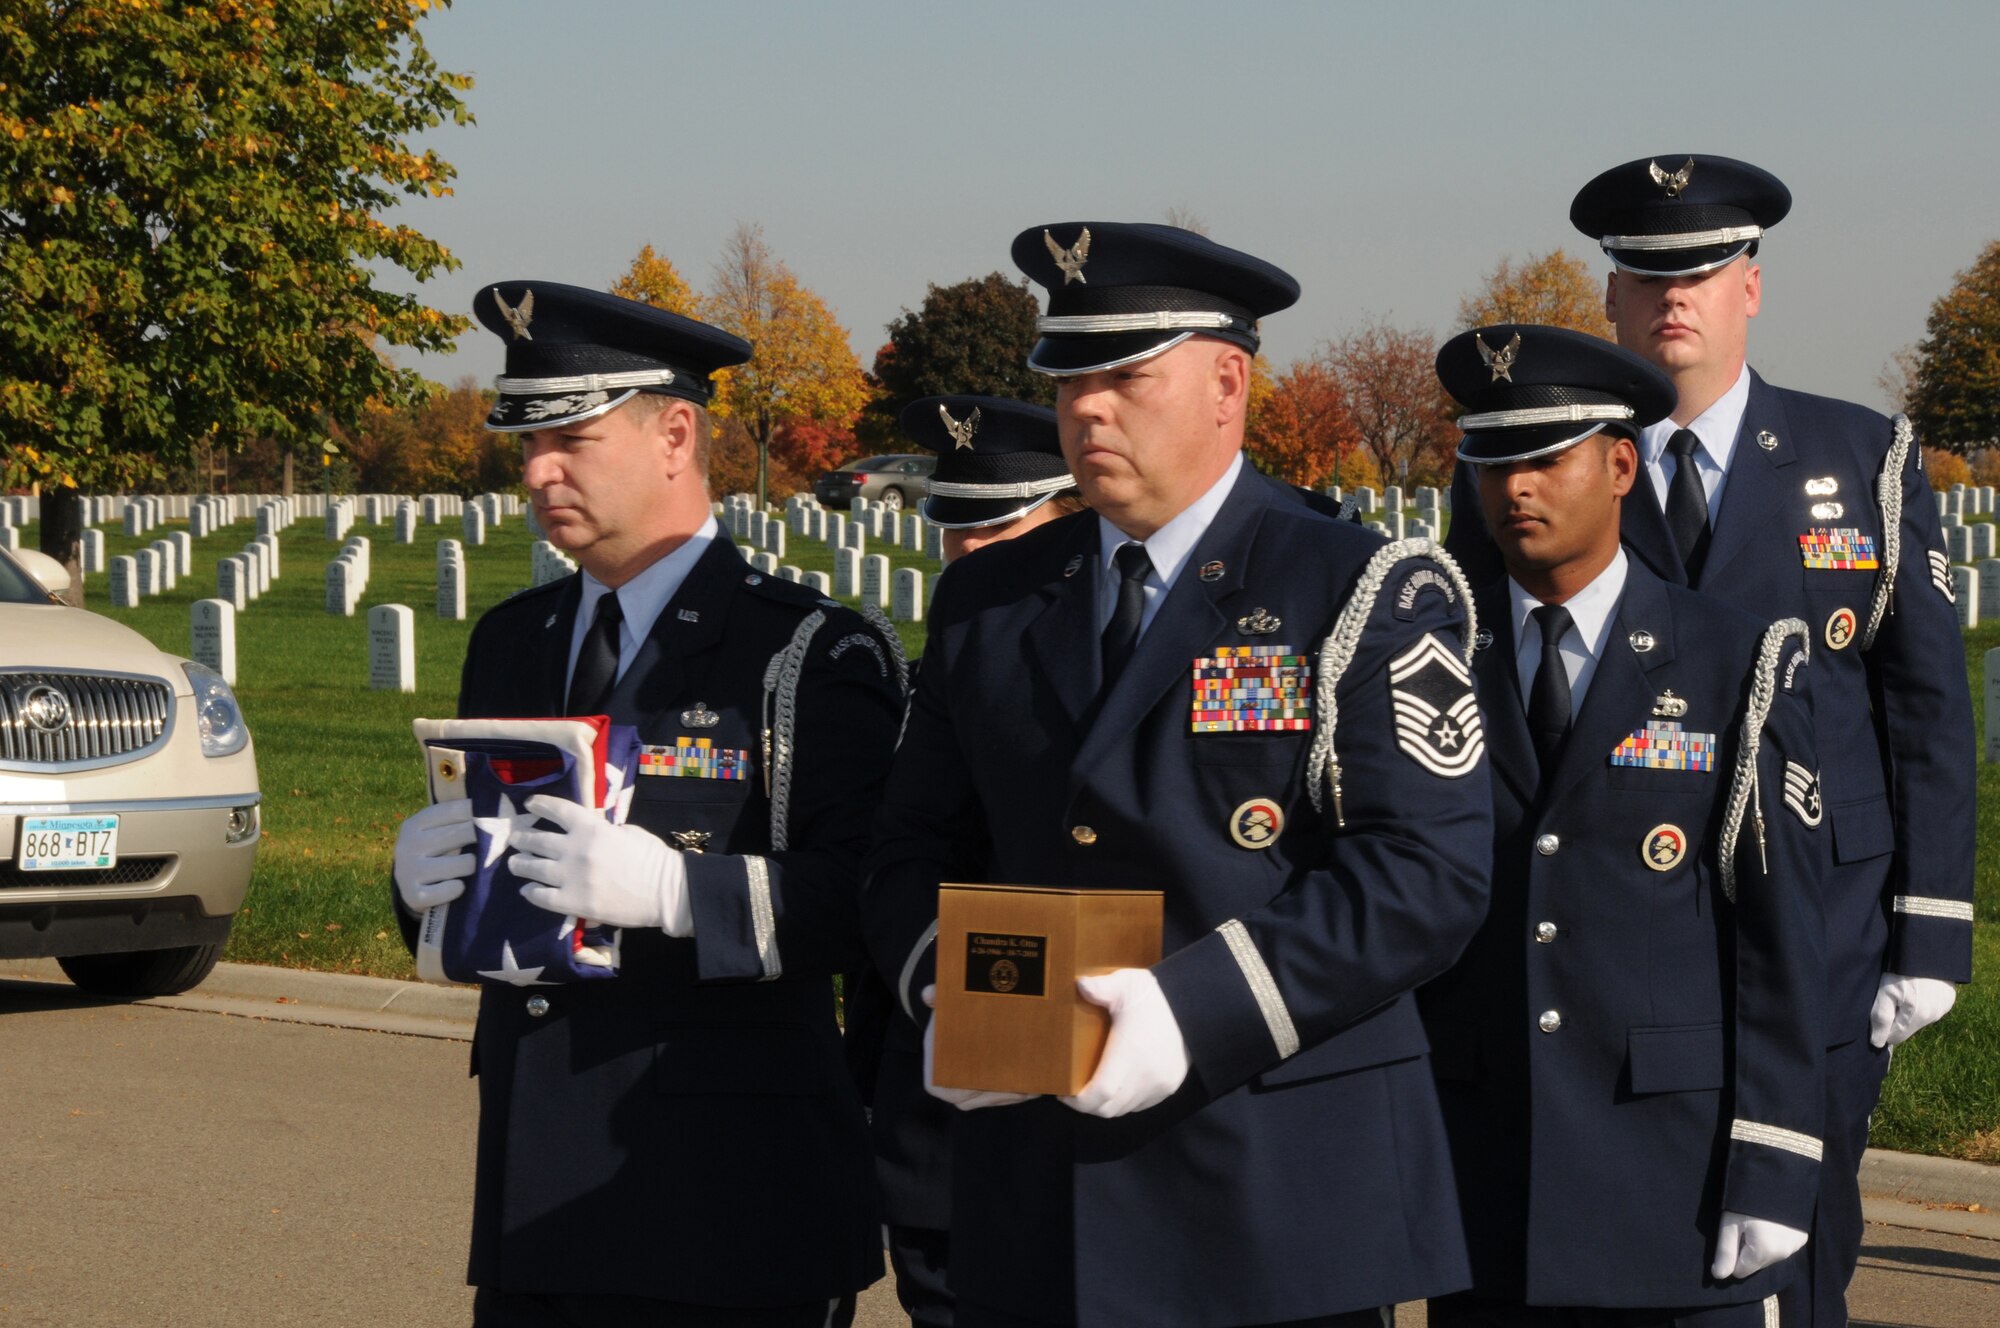 Senior Master Sgt. Dave Gonsoski (center) holds an urn with the ashes of a fallen Airman as the 133rd Airlift Wing Base Honor Guard marches in a funeral procession at Fort Snelling National Cemetery on Oct. 12, 2010. Gonsoski has been selected to represent Minnesota as the Air Guard Outstanding Honor Guard member for 2011.USAF official photo by Senior Master Sgt. Mark Moss